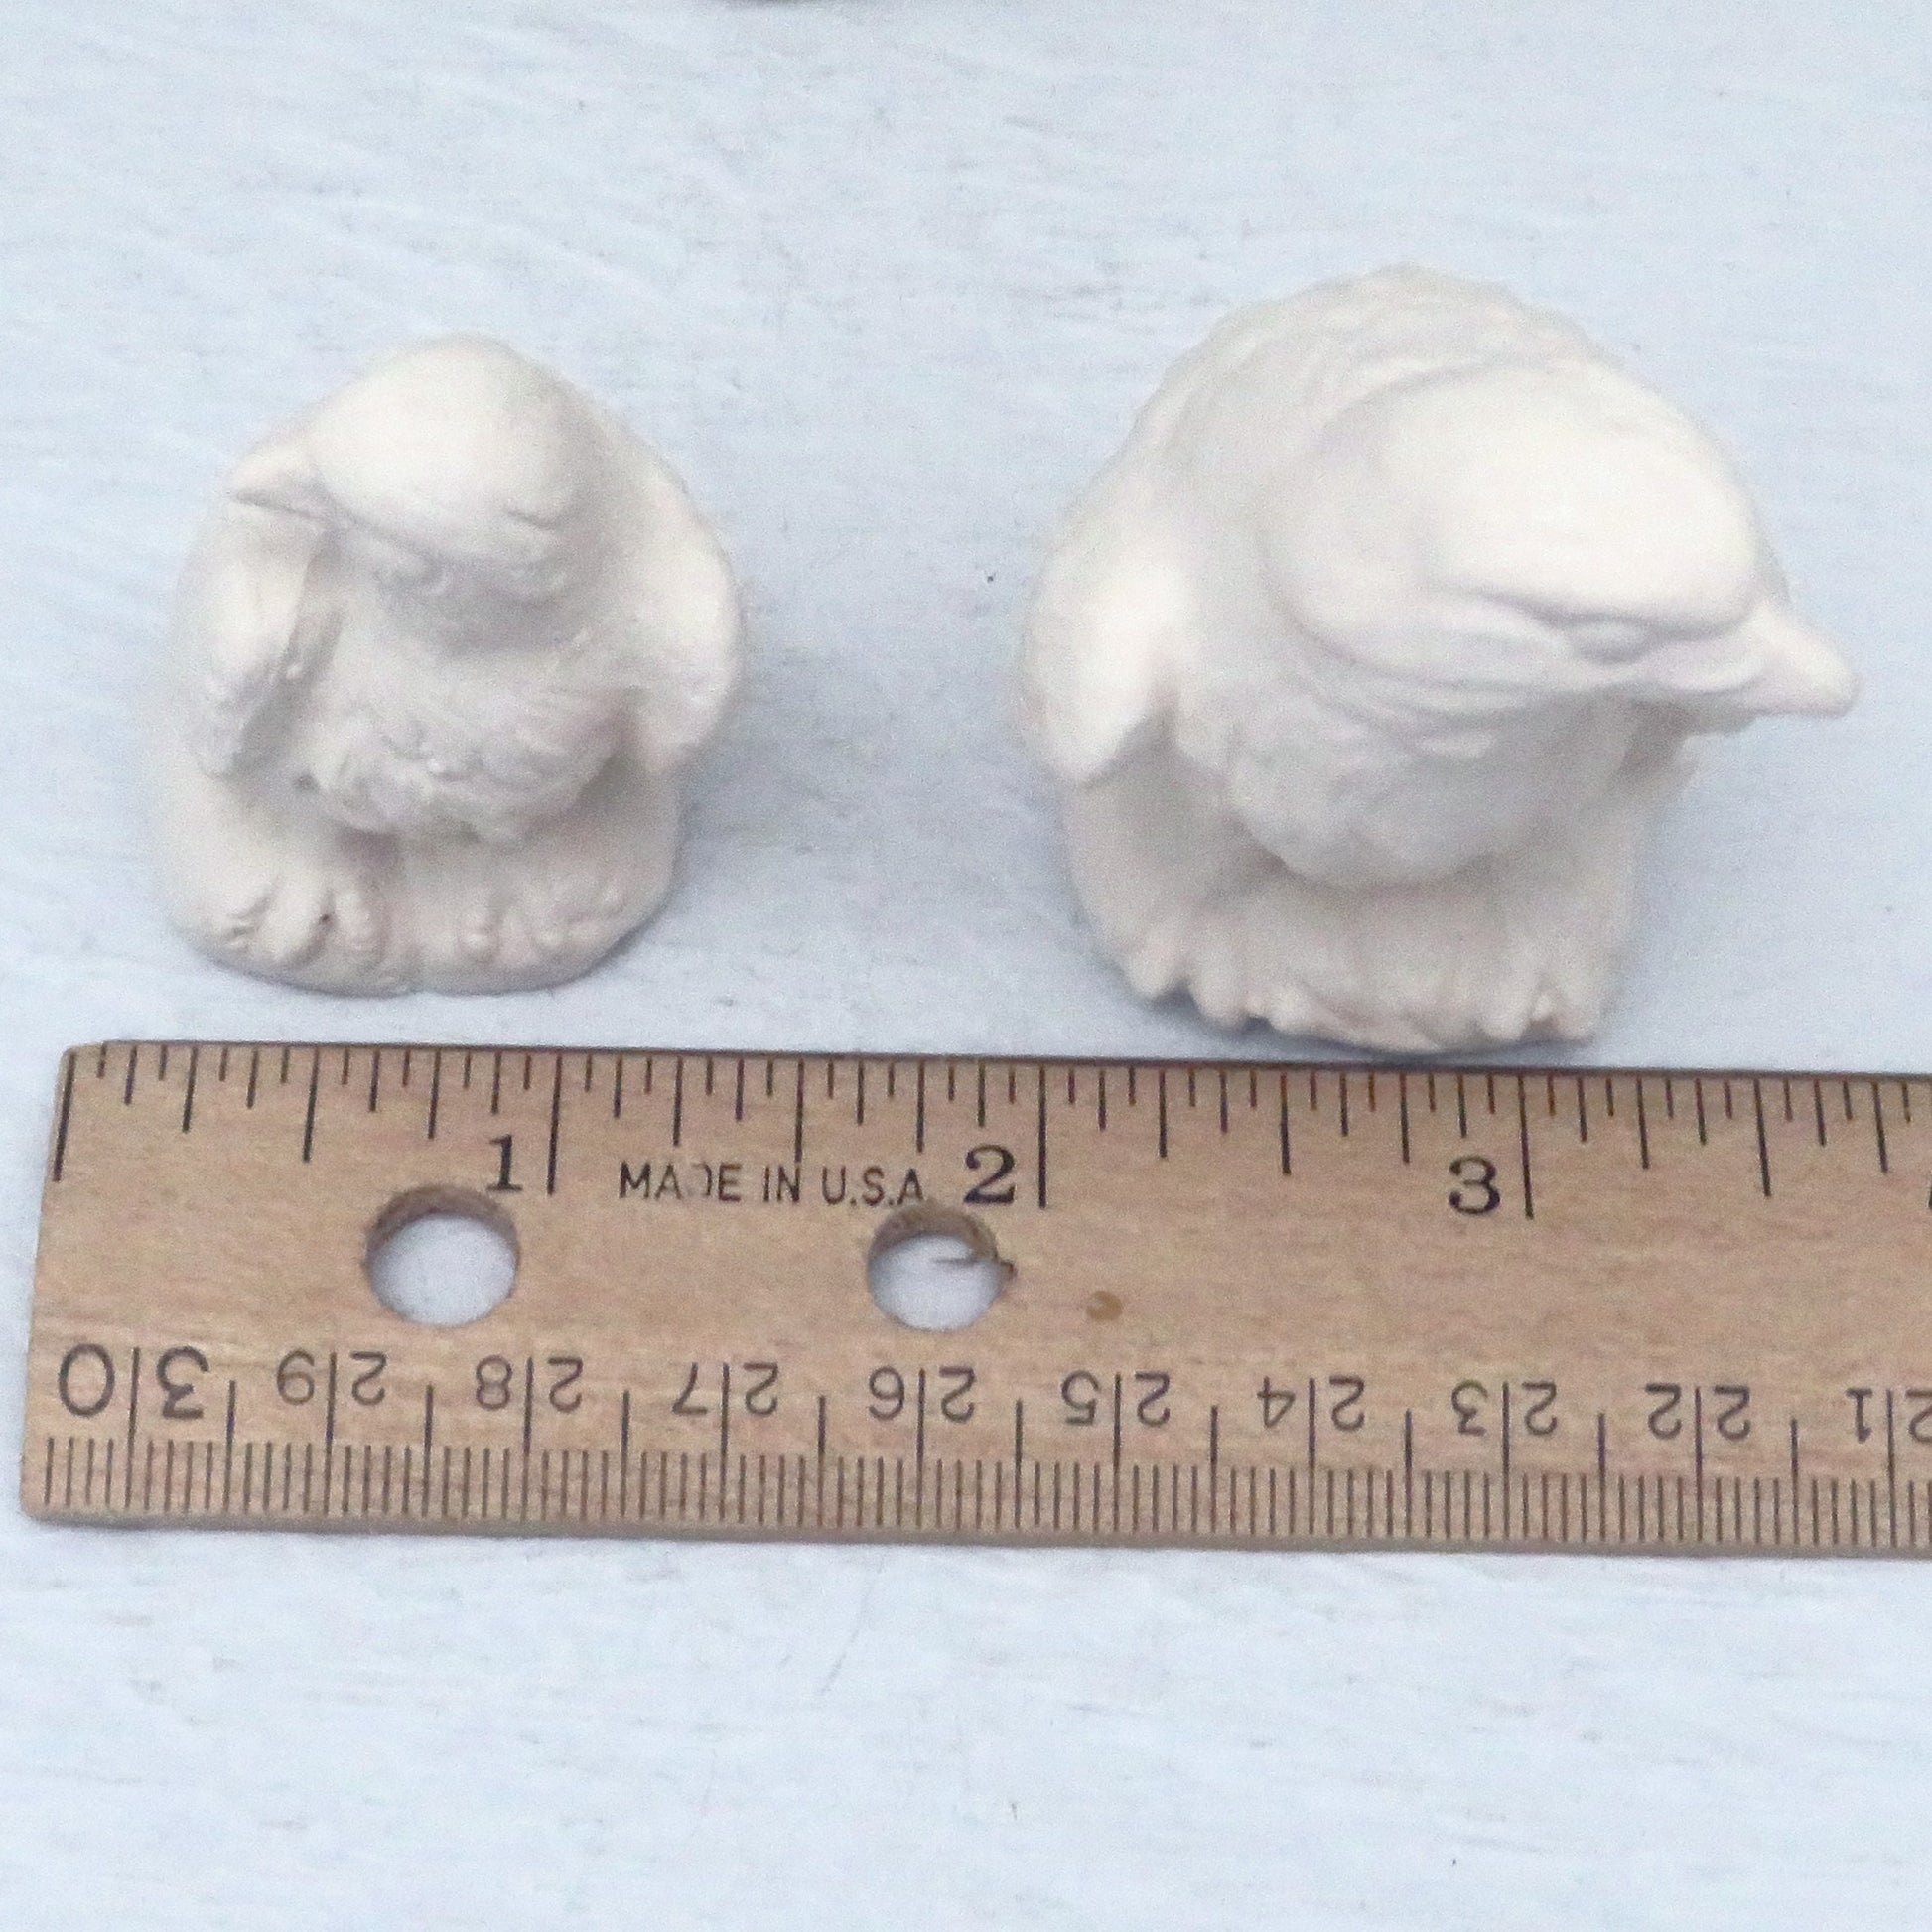 top view of paintable ceramic eagle figurines showing width